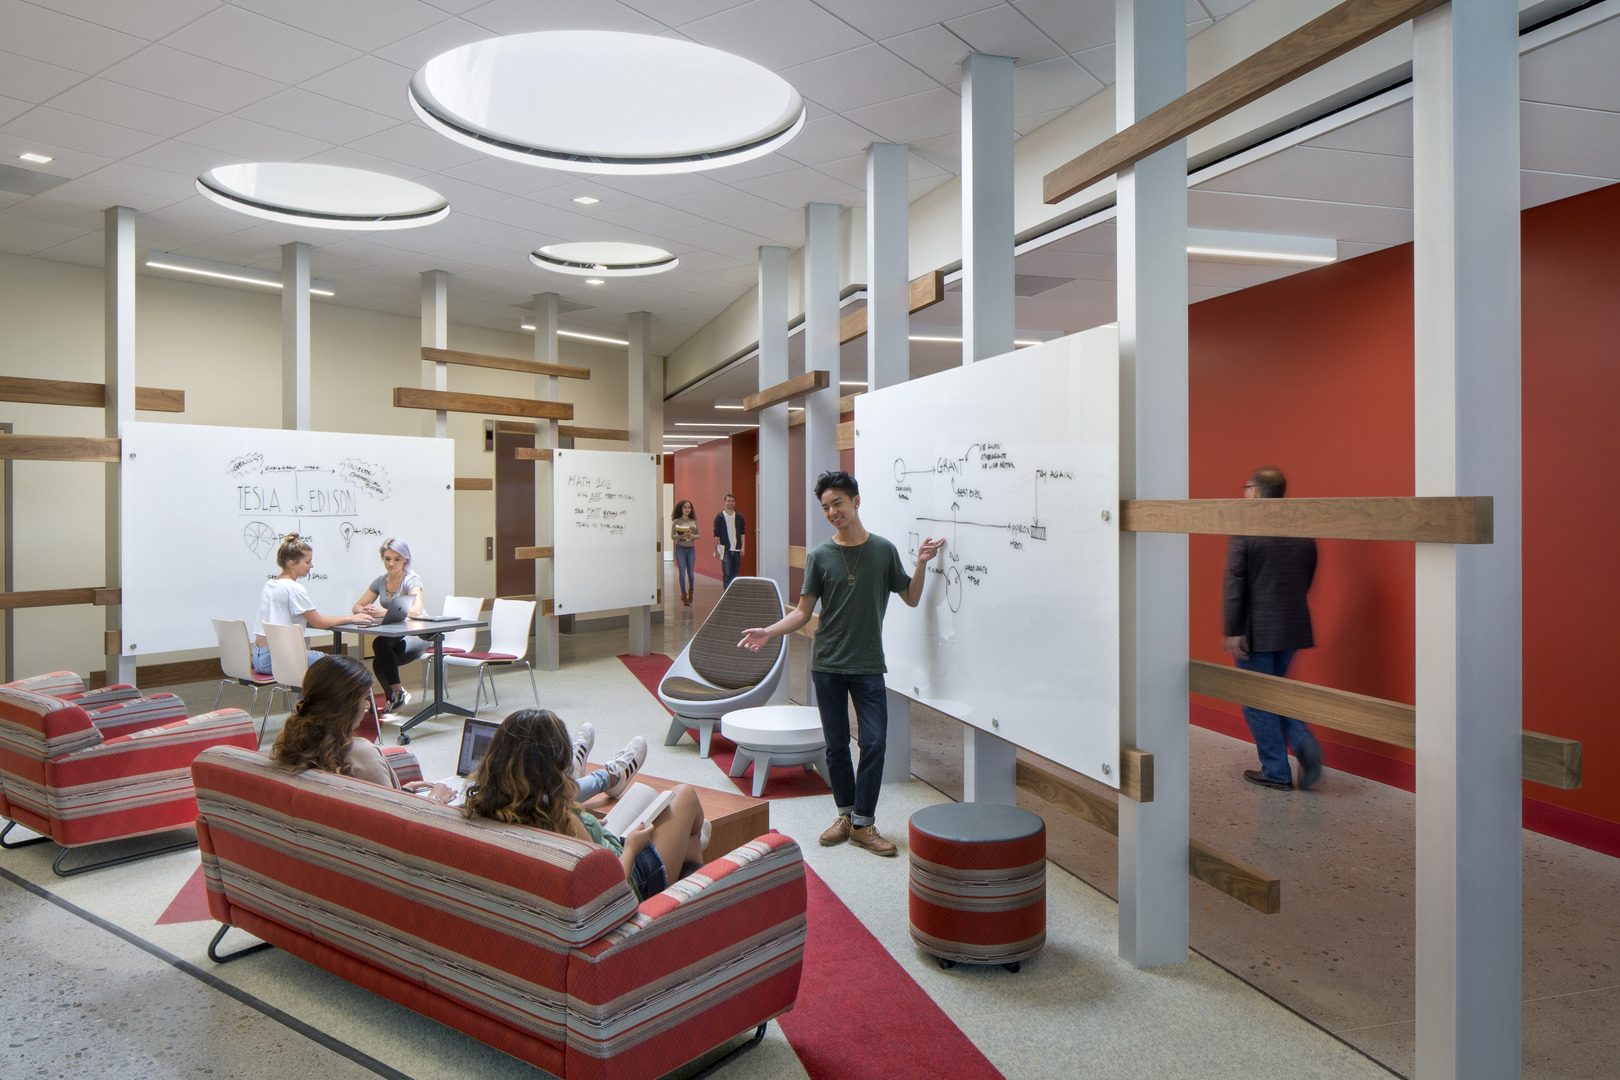 HMC Architects plays a distinct role in public and private space architecture on campuses.